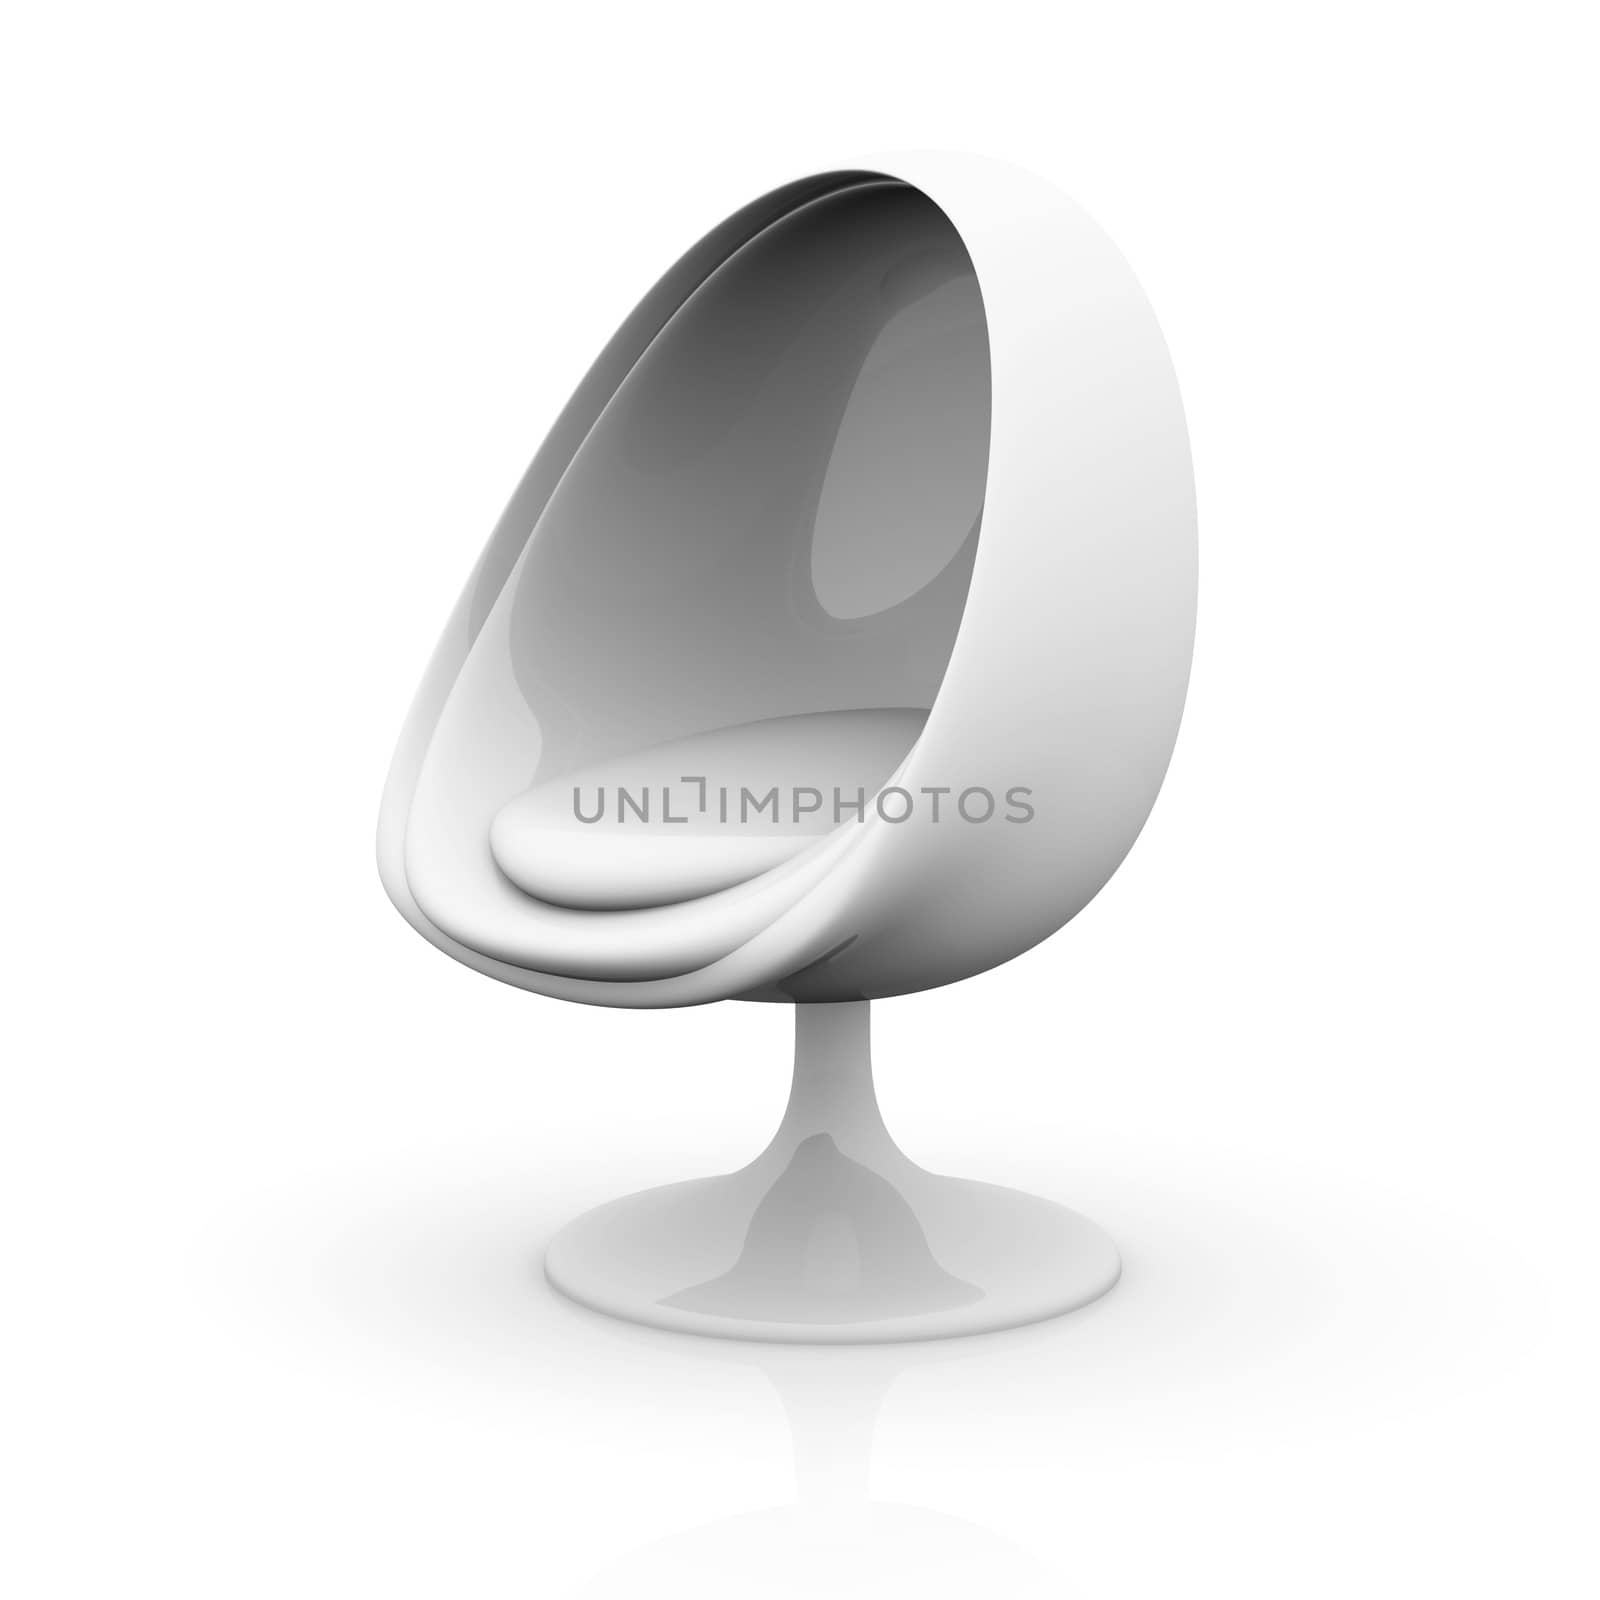 3D rendered Illustration. Isolated on white.